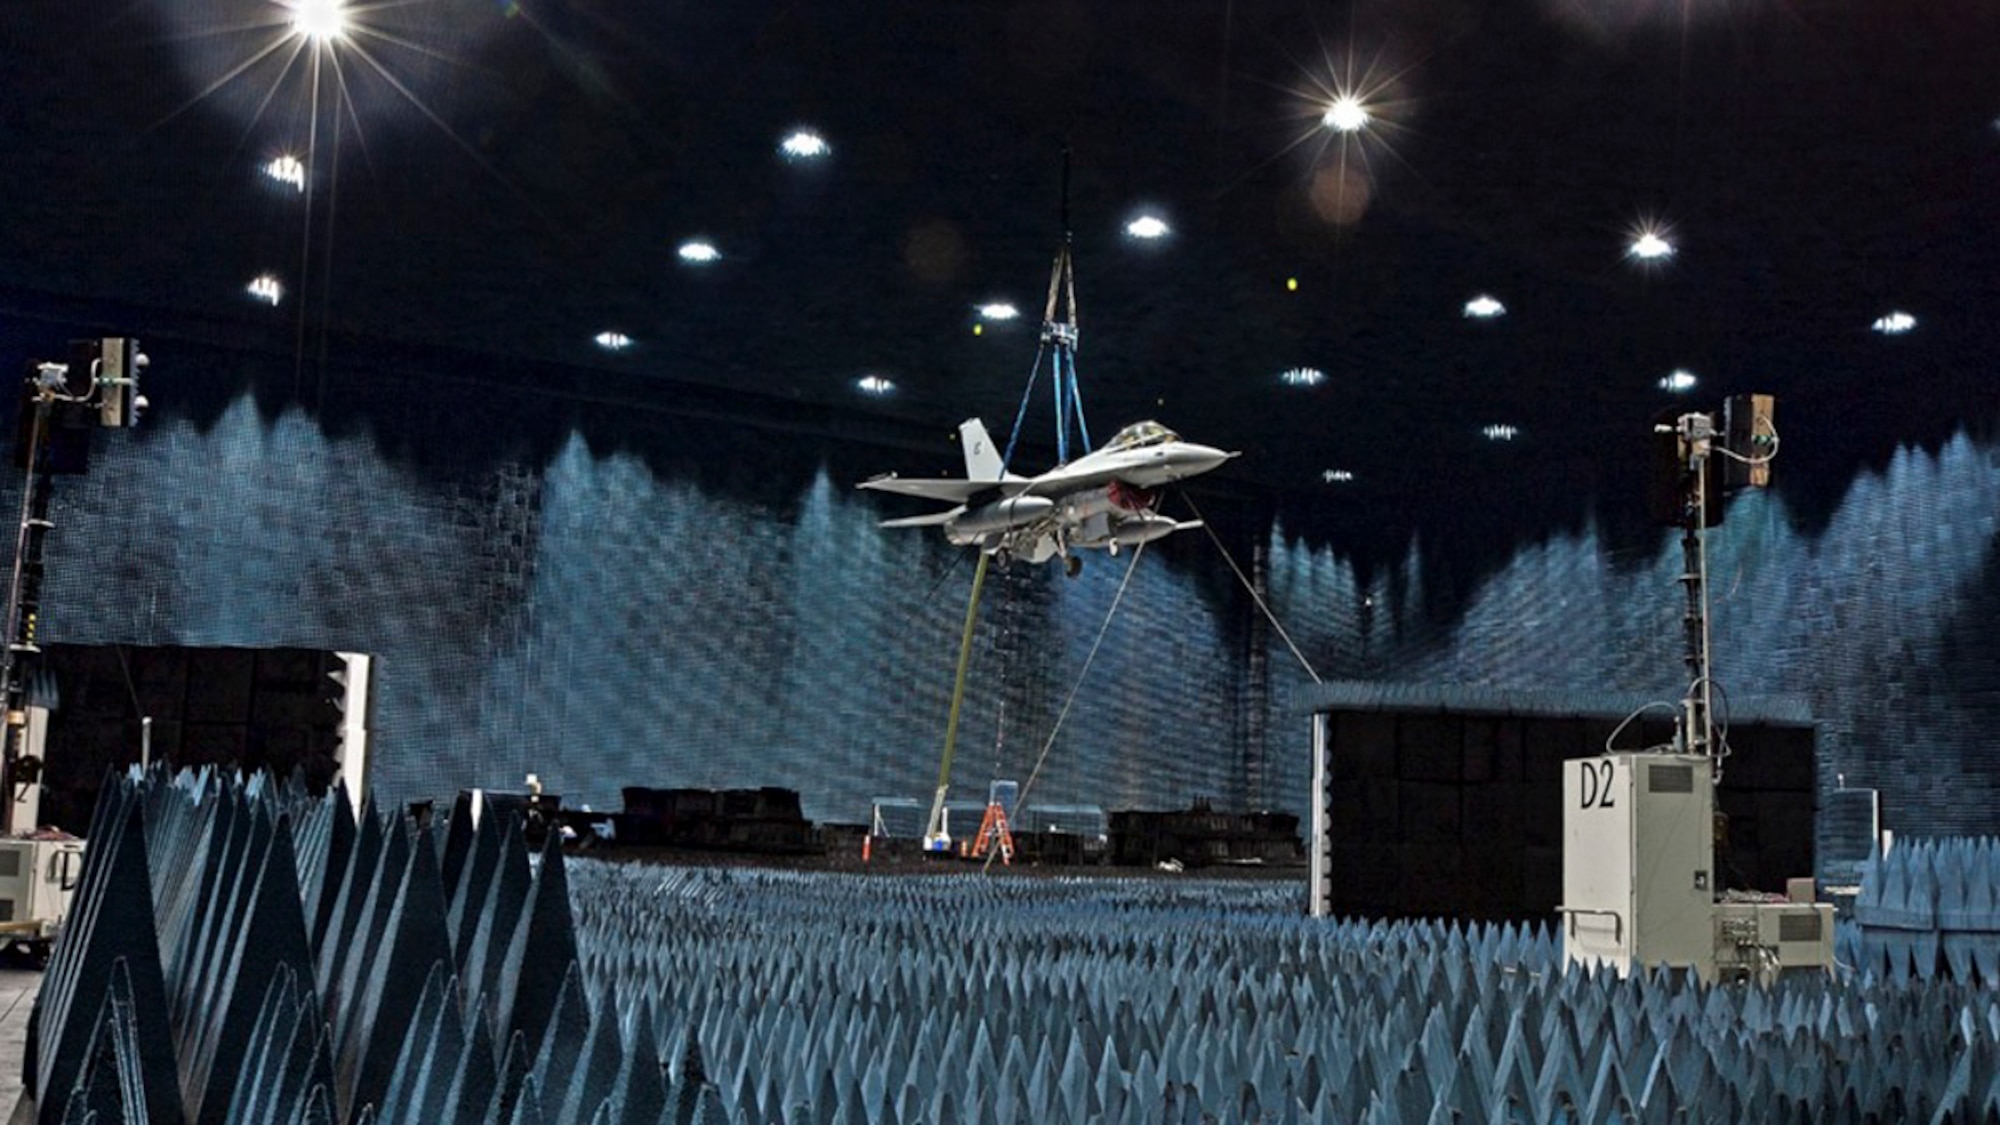 A Pictorial Glimpse of the Benefield Anechoic Facility